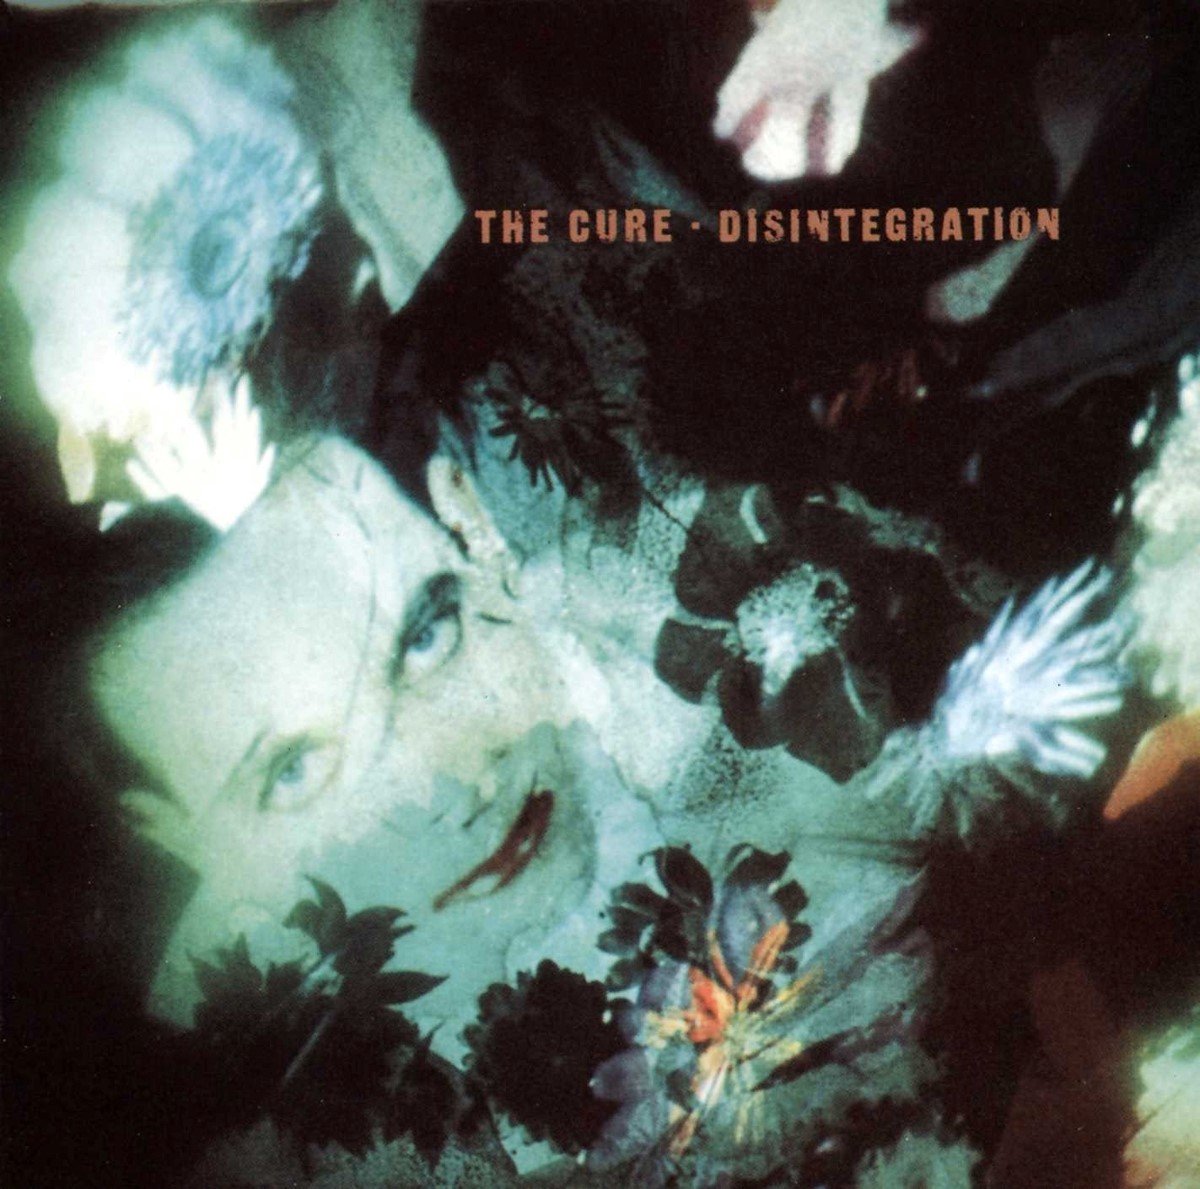 The Cure - Disintegration (CD) - The Cure